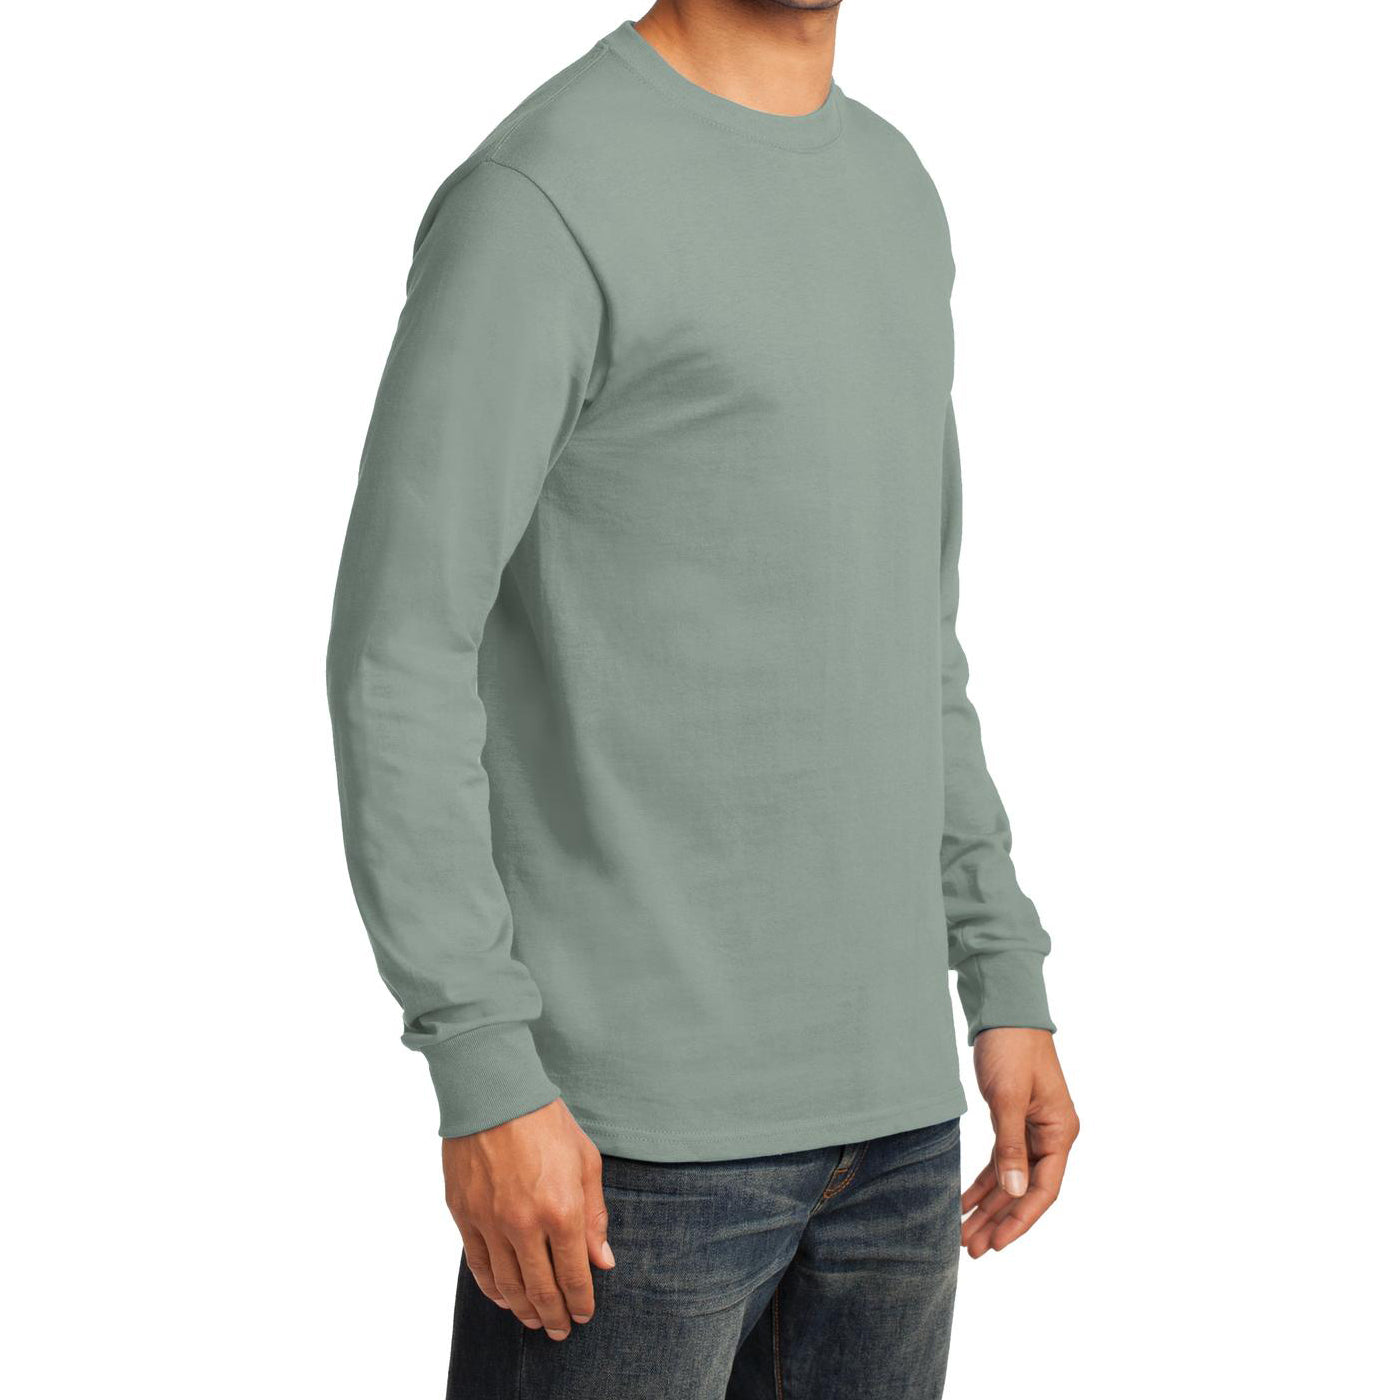 Men's Long Sleeve Essential Tee - Stonewashed Green - Side